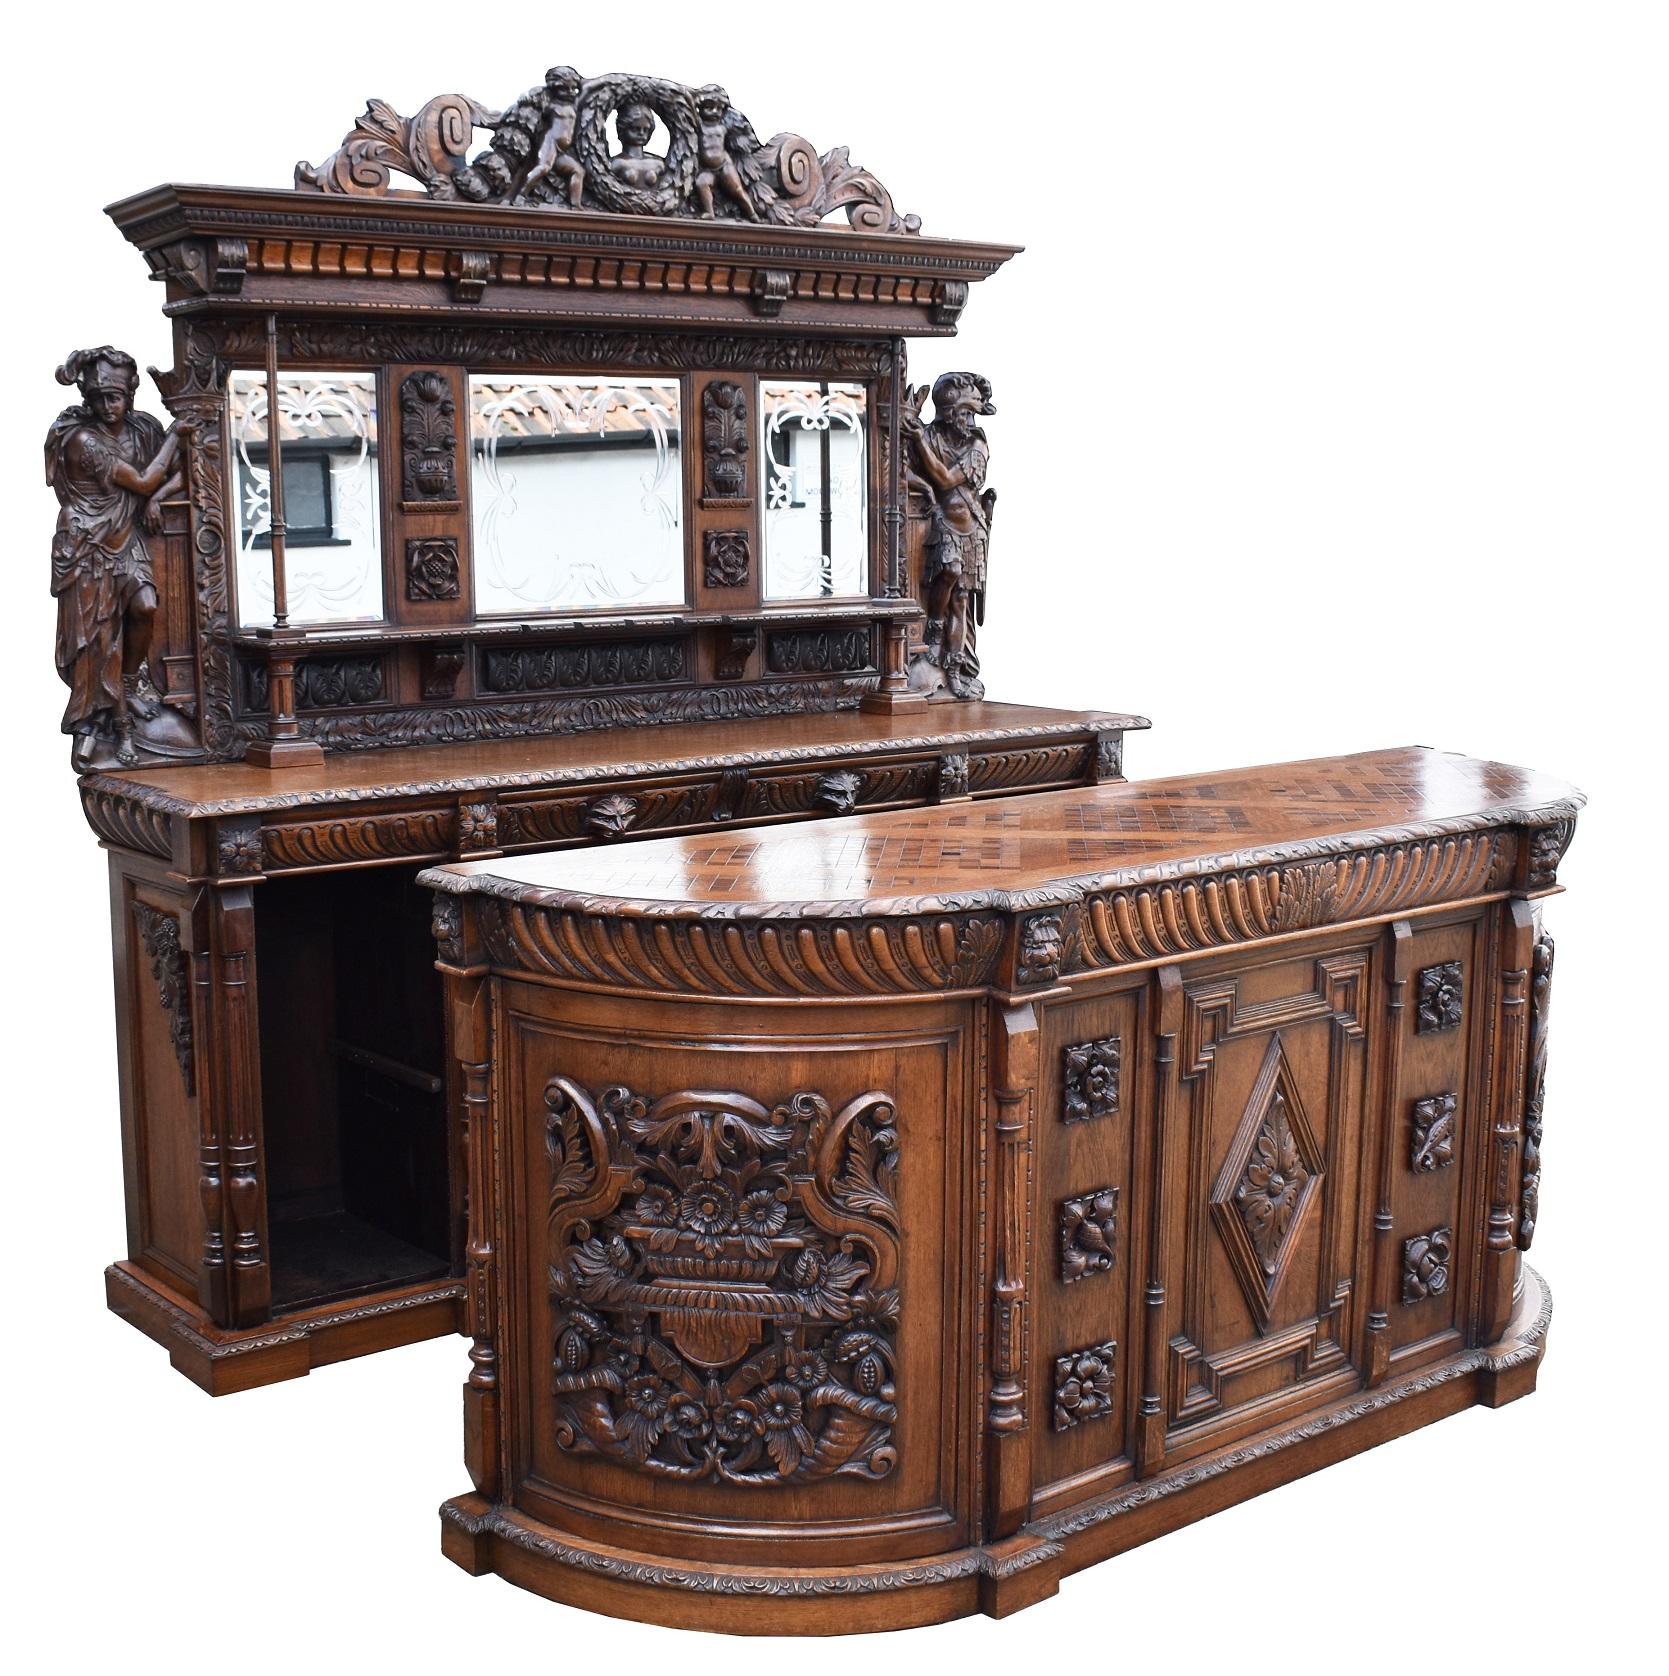 For sale is a fine quality 19th century carved oak bar heavily influenced by 18th century style, having an ornately hand carved pediment depicting a female figure to the centre, surrounded by a wreath flanked by a cherub on either side, terminating